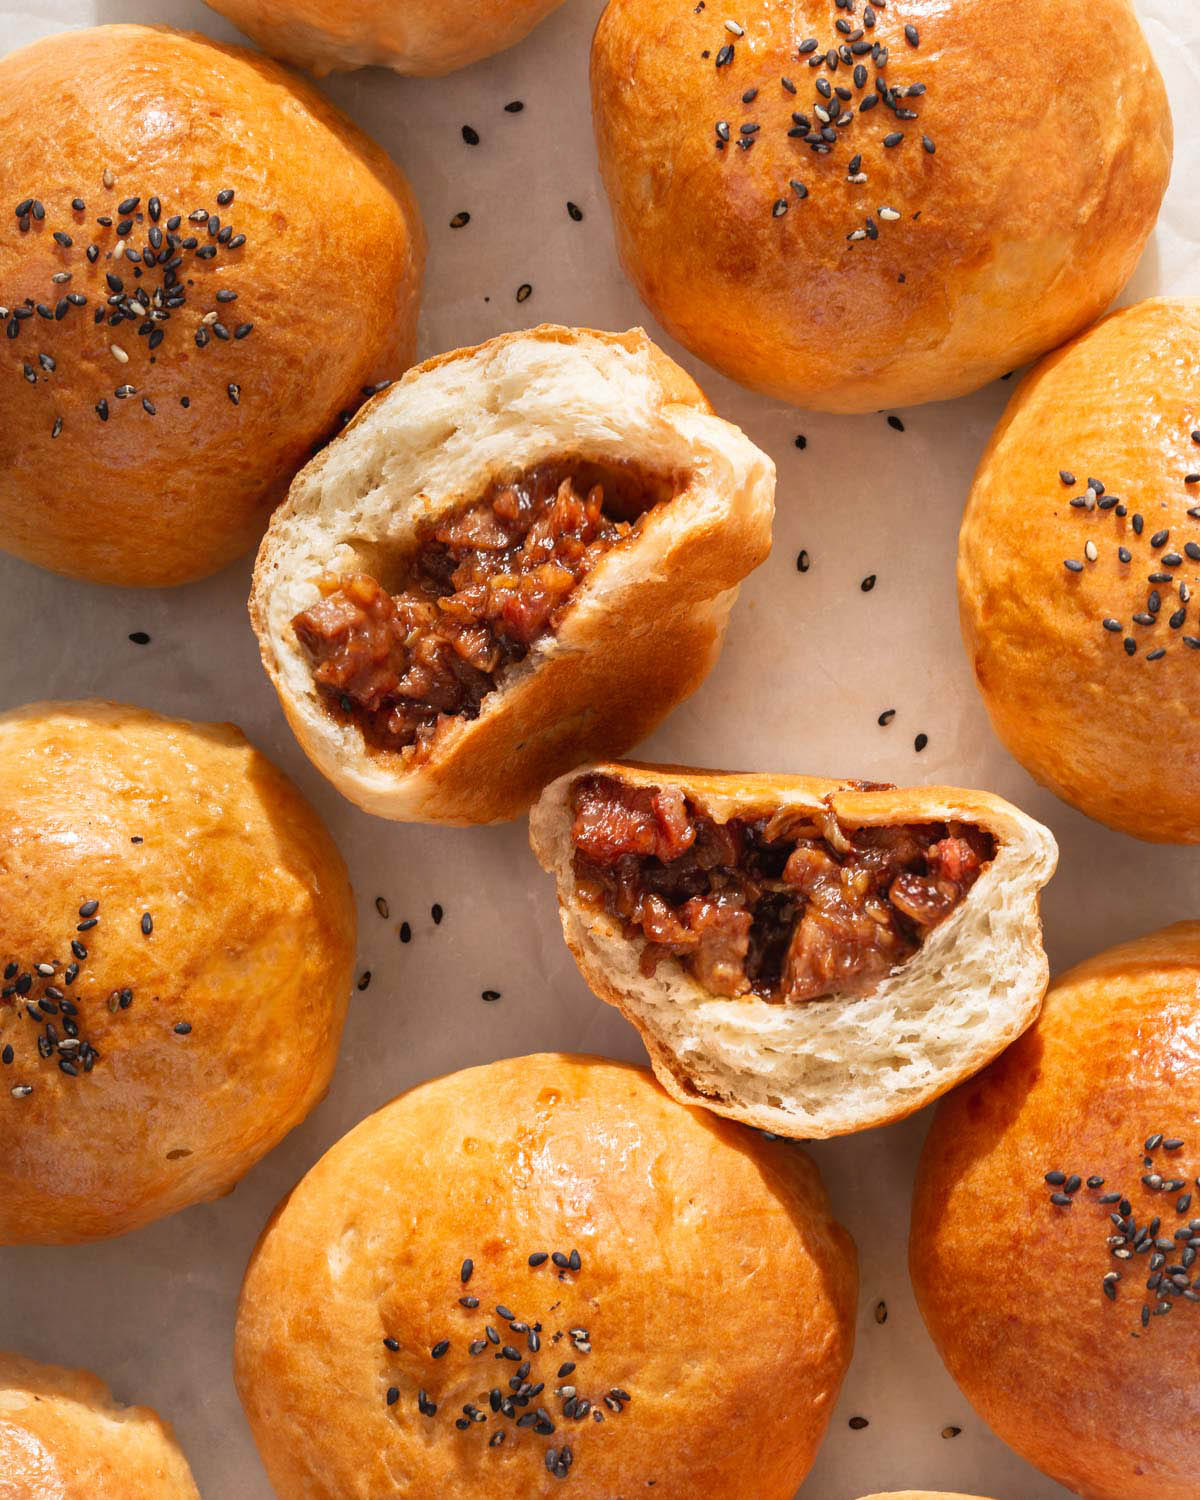 Looking down onto a tray of baked pork buns with a bun split open showing the stuffing.